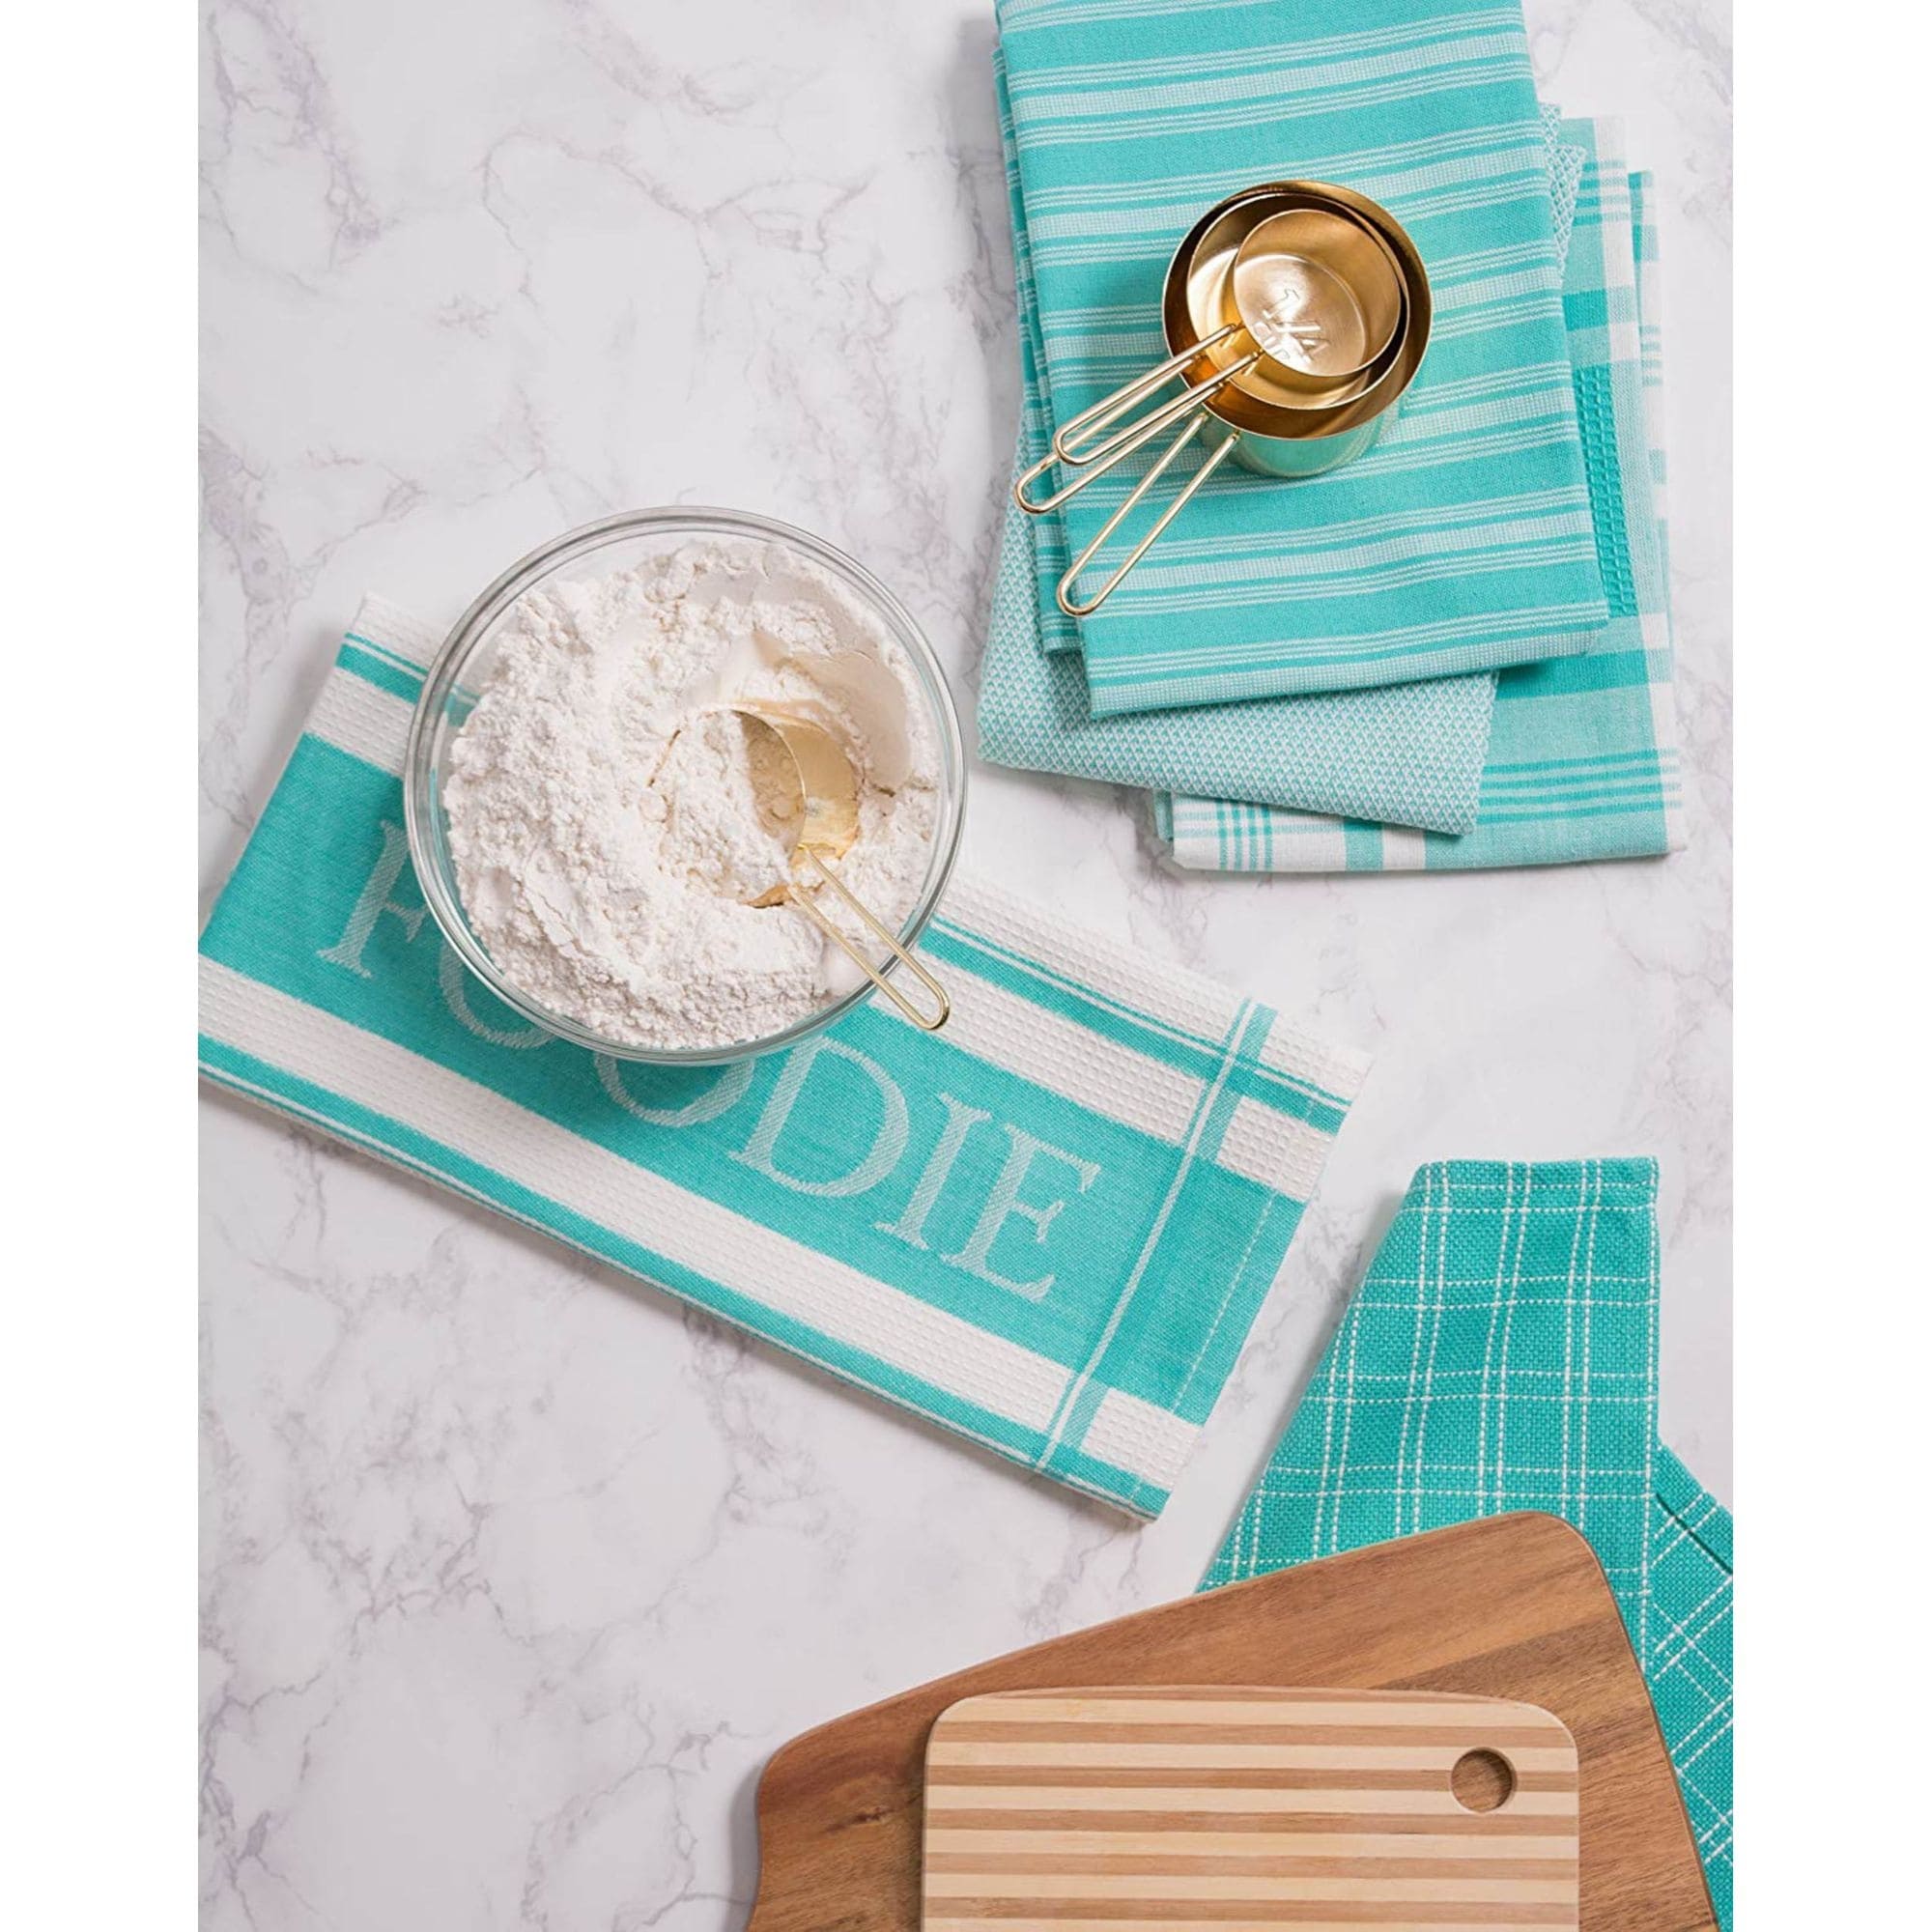 https://ak1.ostkcdn.com/images/products/is/images/direct/fc9c7802f7a624cad136f50f82c858001c5922a7/Set-of-5-Teal-Dish-Cloths-and-Dish-Towels-28%22-x-18%22.jpg